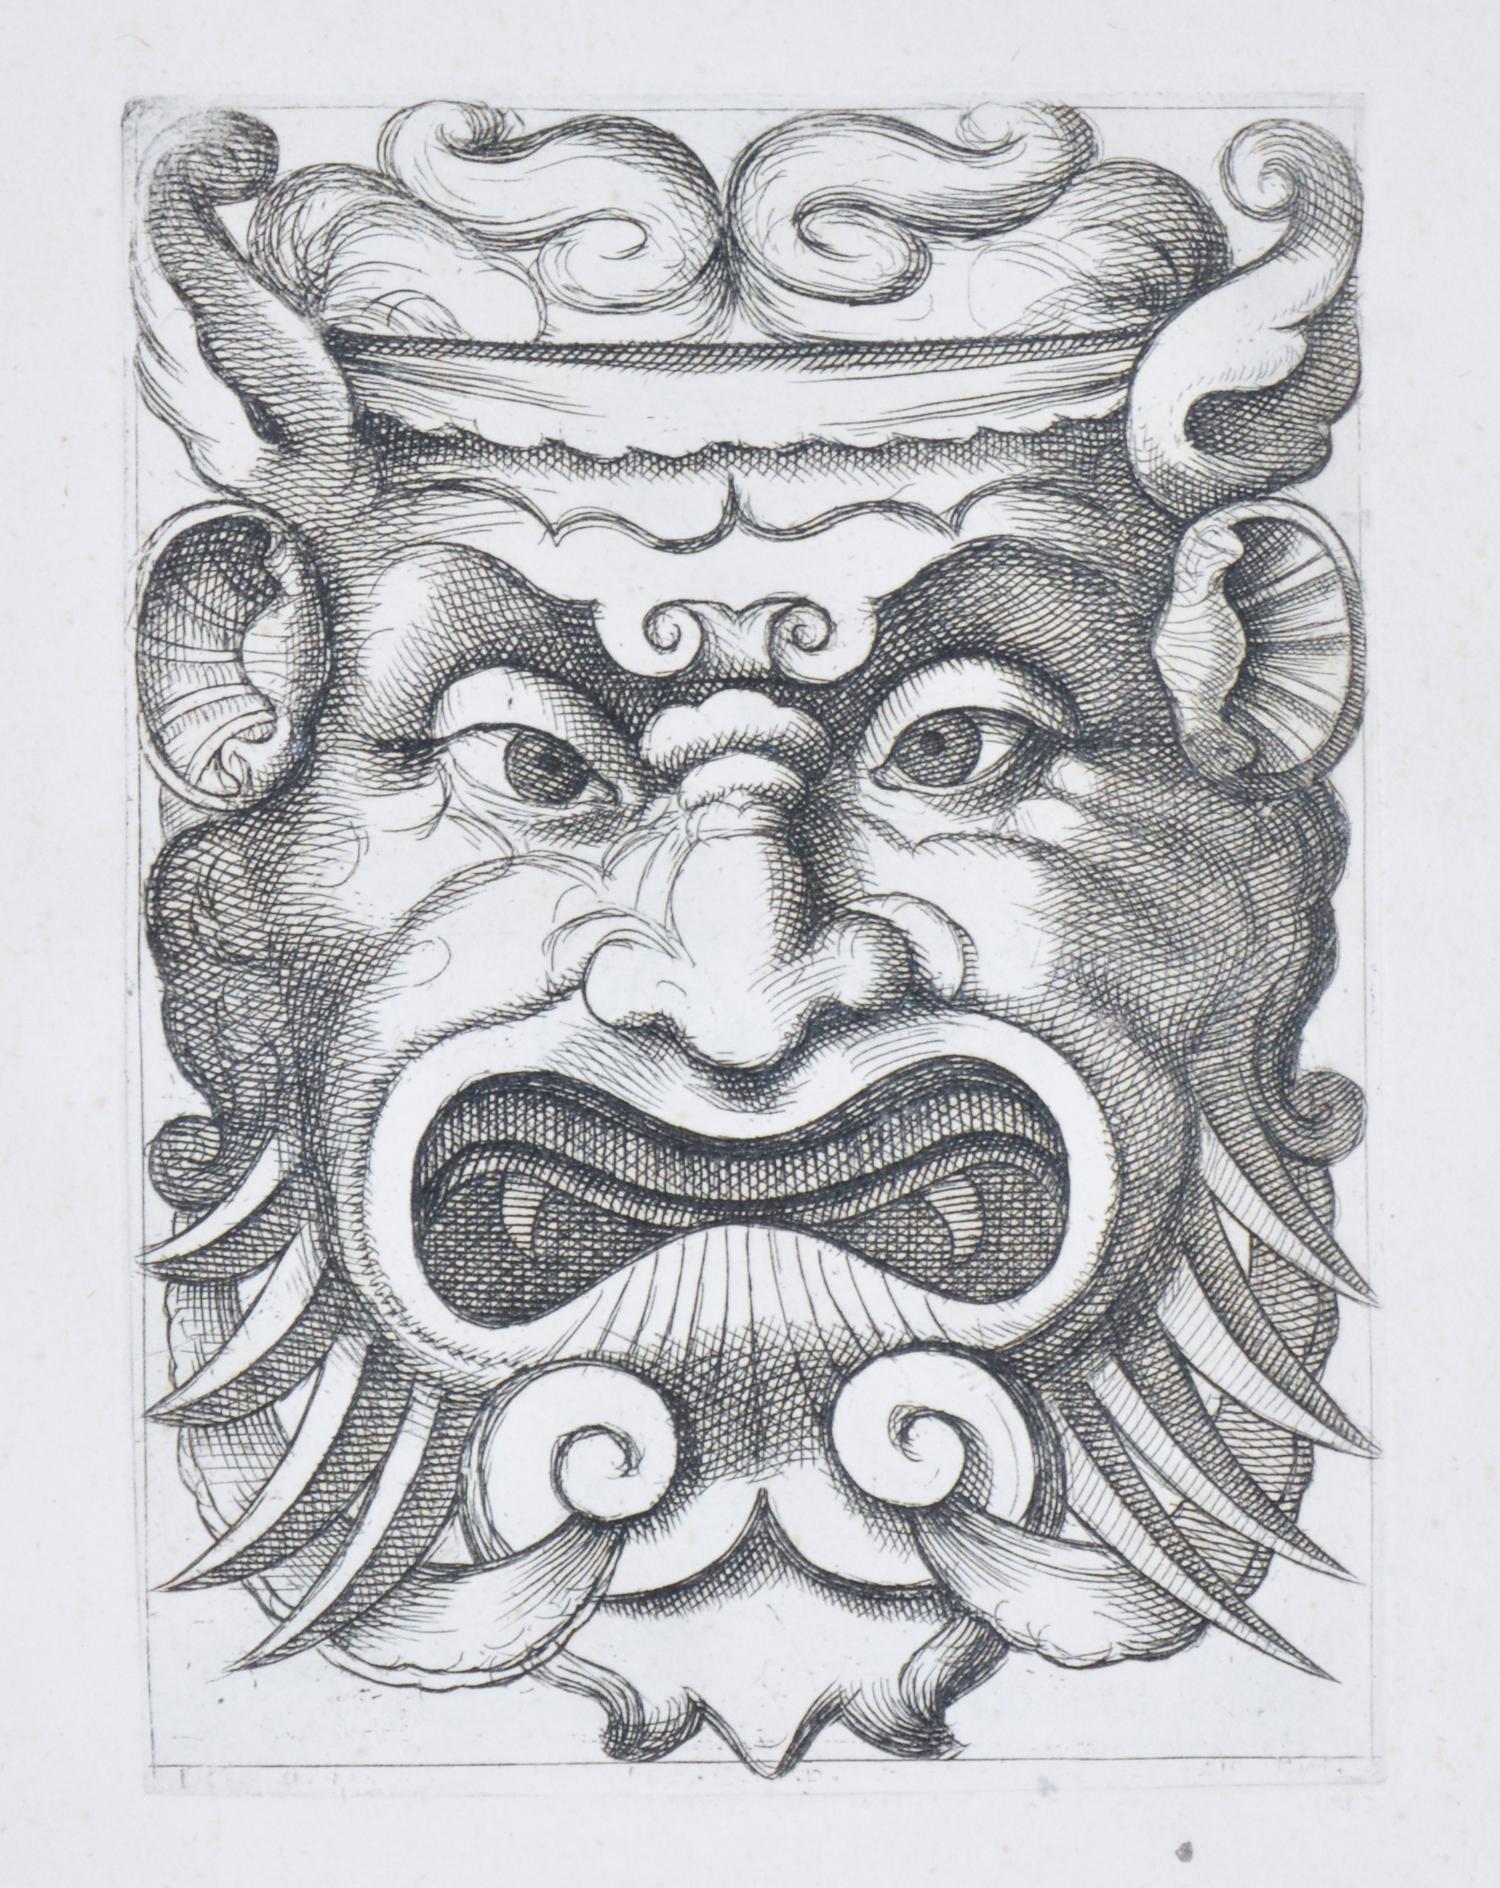 4 Groups of 9 plates of Grotesque Masks.
[Published: Venanzio Monaldini, Rome, 1781].

Rare and strong impressions of etchings of grotesque masks, after original designs by the Italian (Rome) artist and engraver Aloisio Giovannoli (1550-1618). 

The